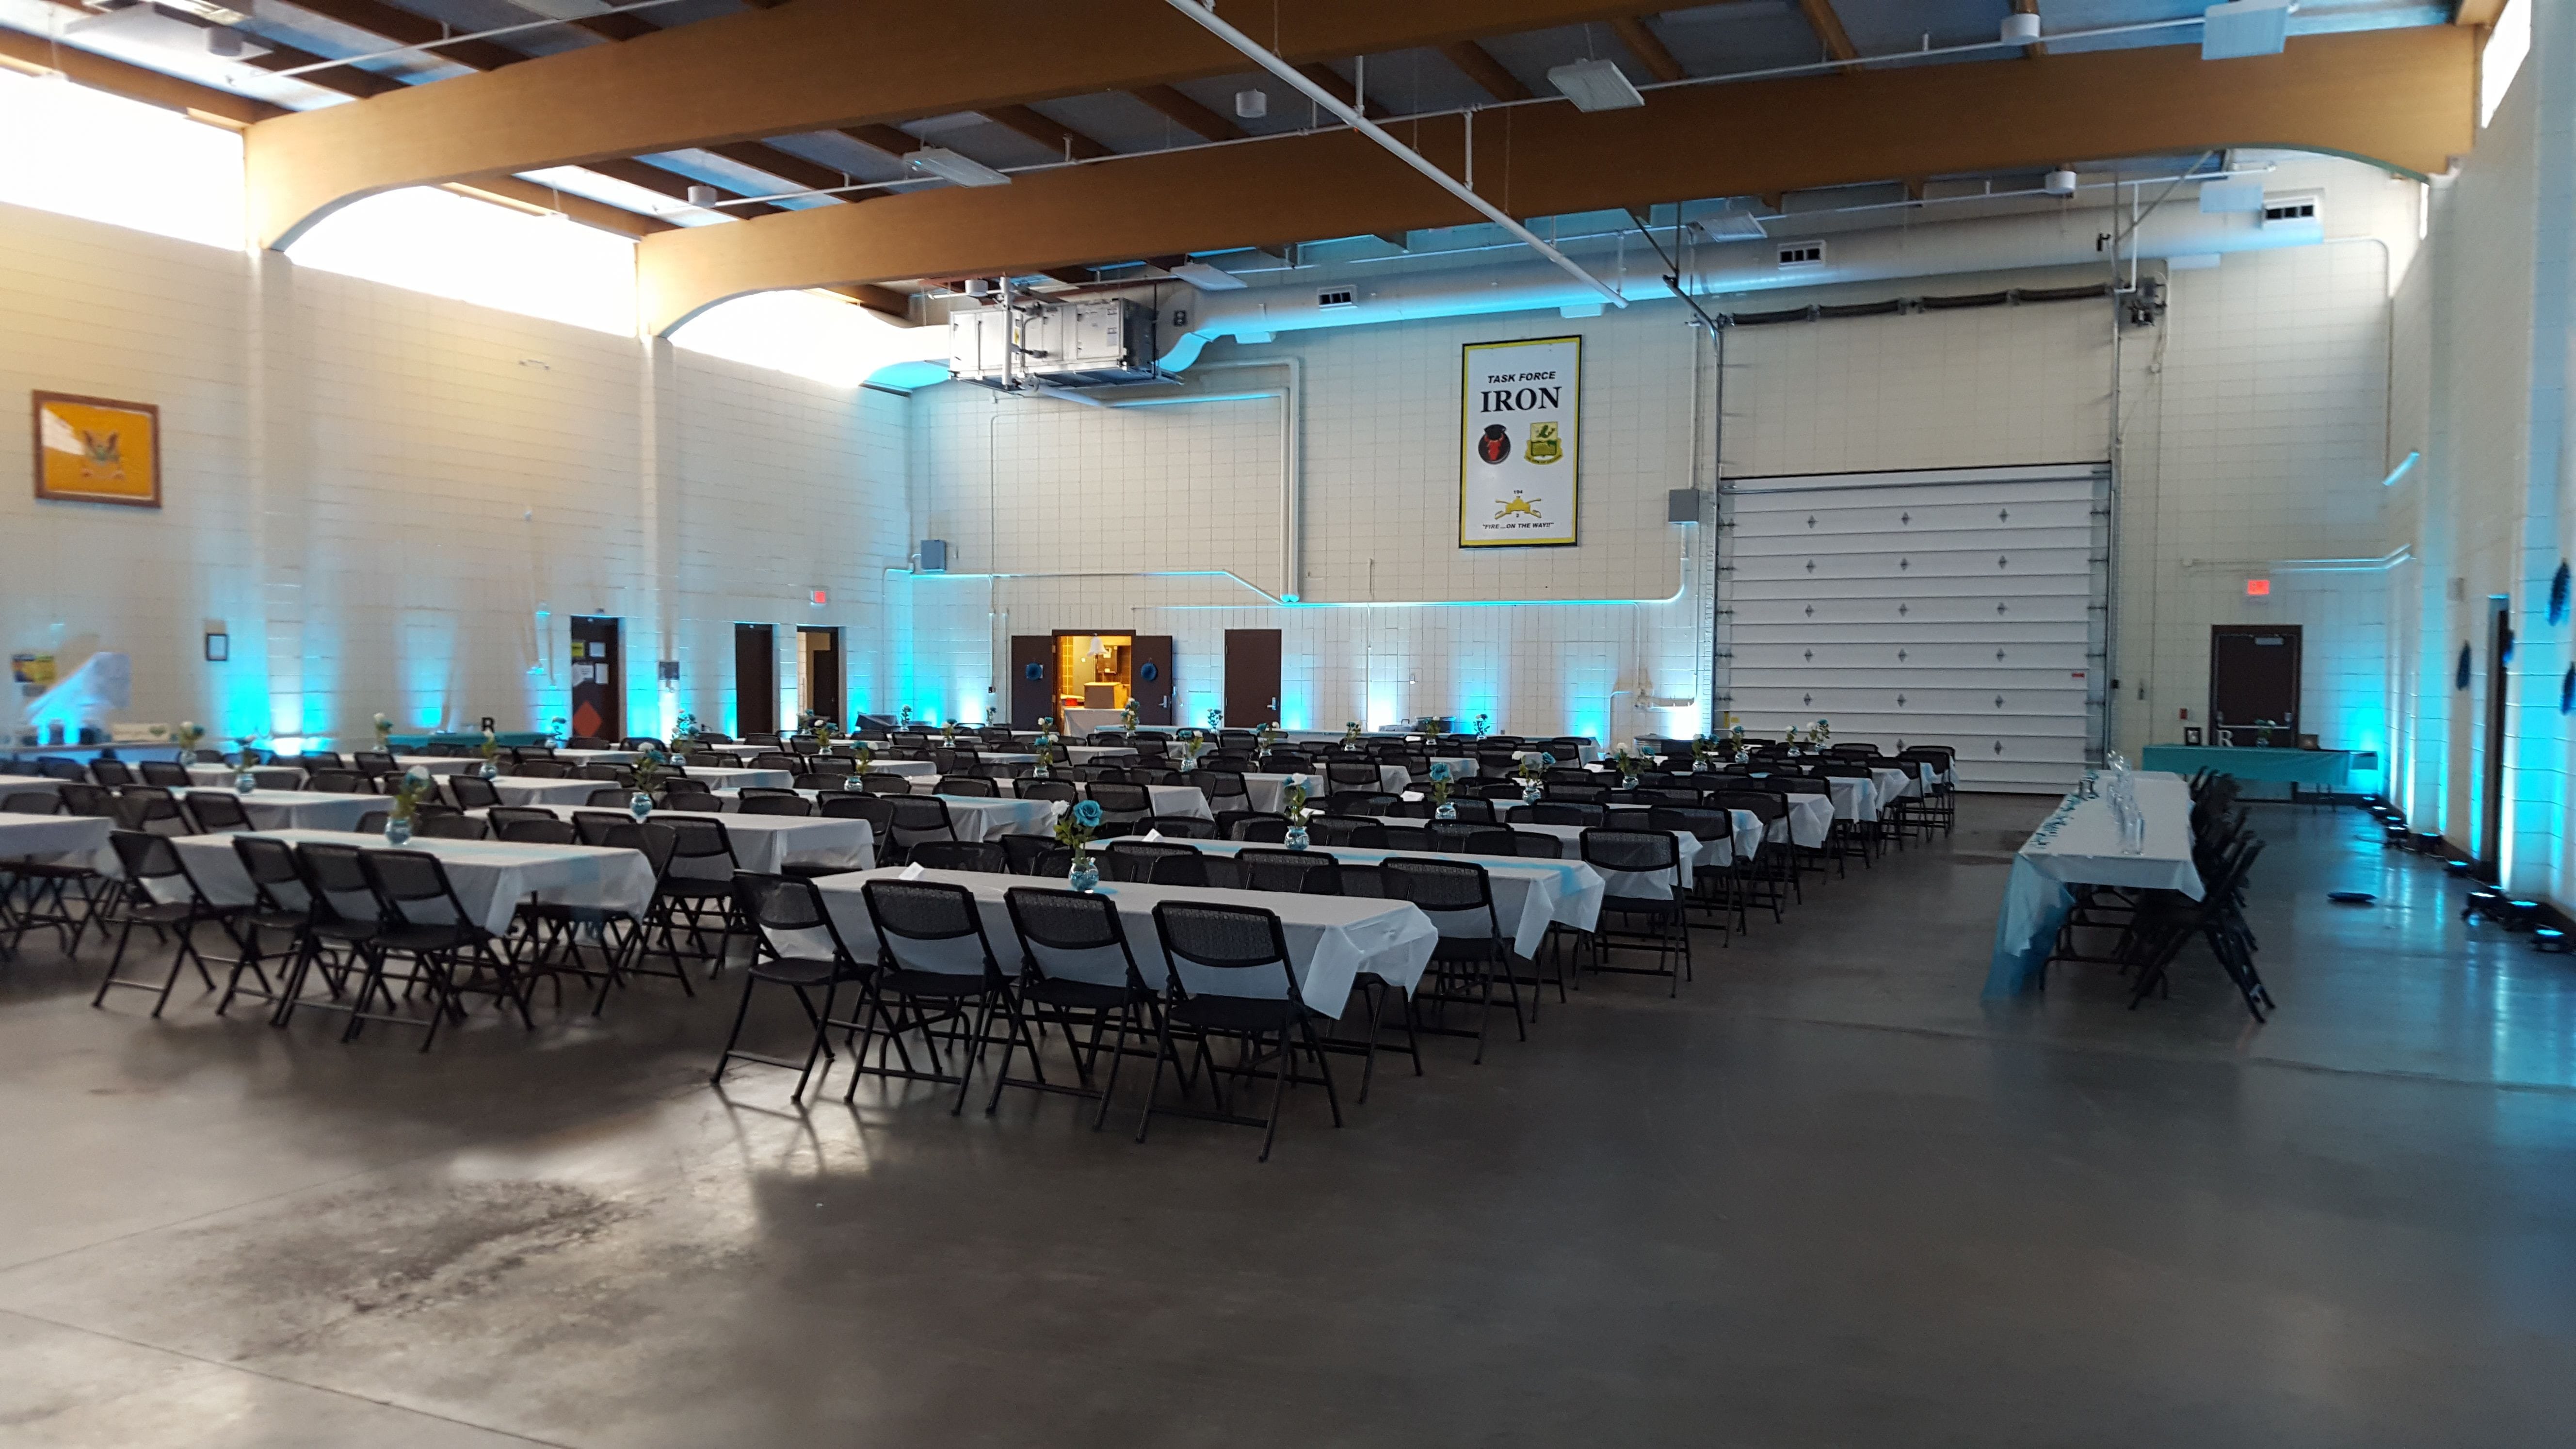 Duluth Armory wedding lighting by Duluth Event Lighting. Up lighting in teal.